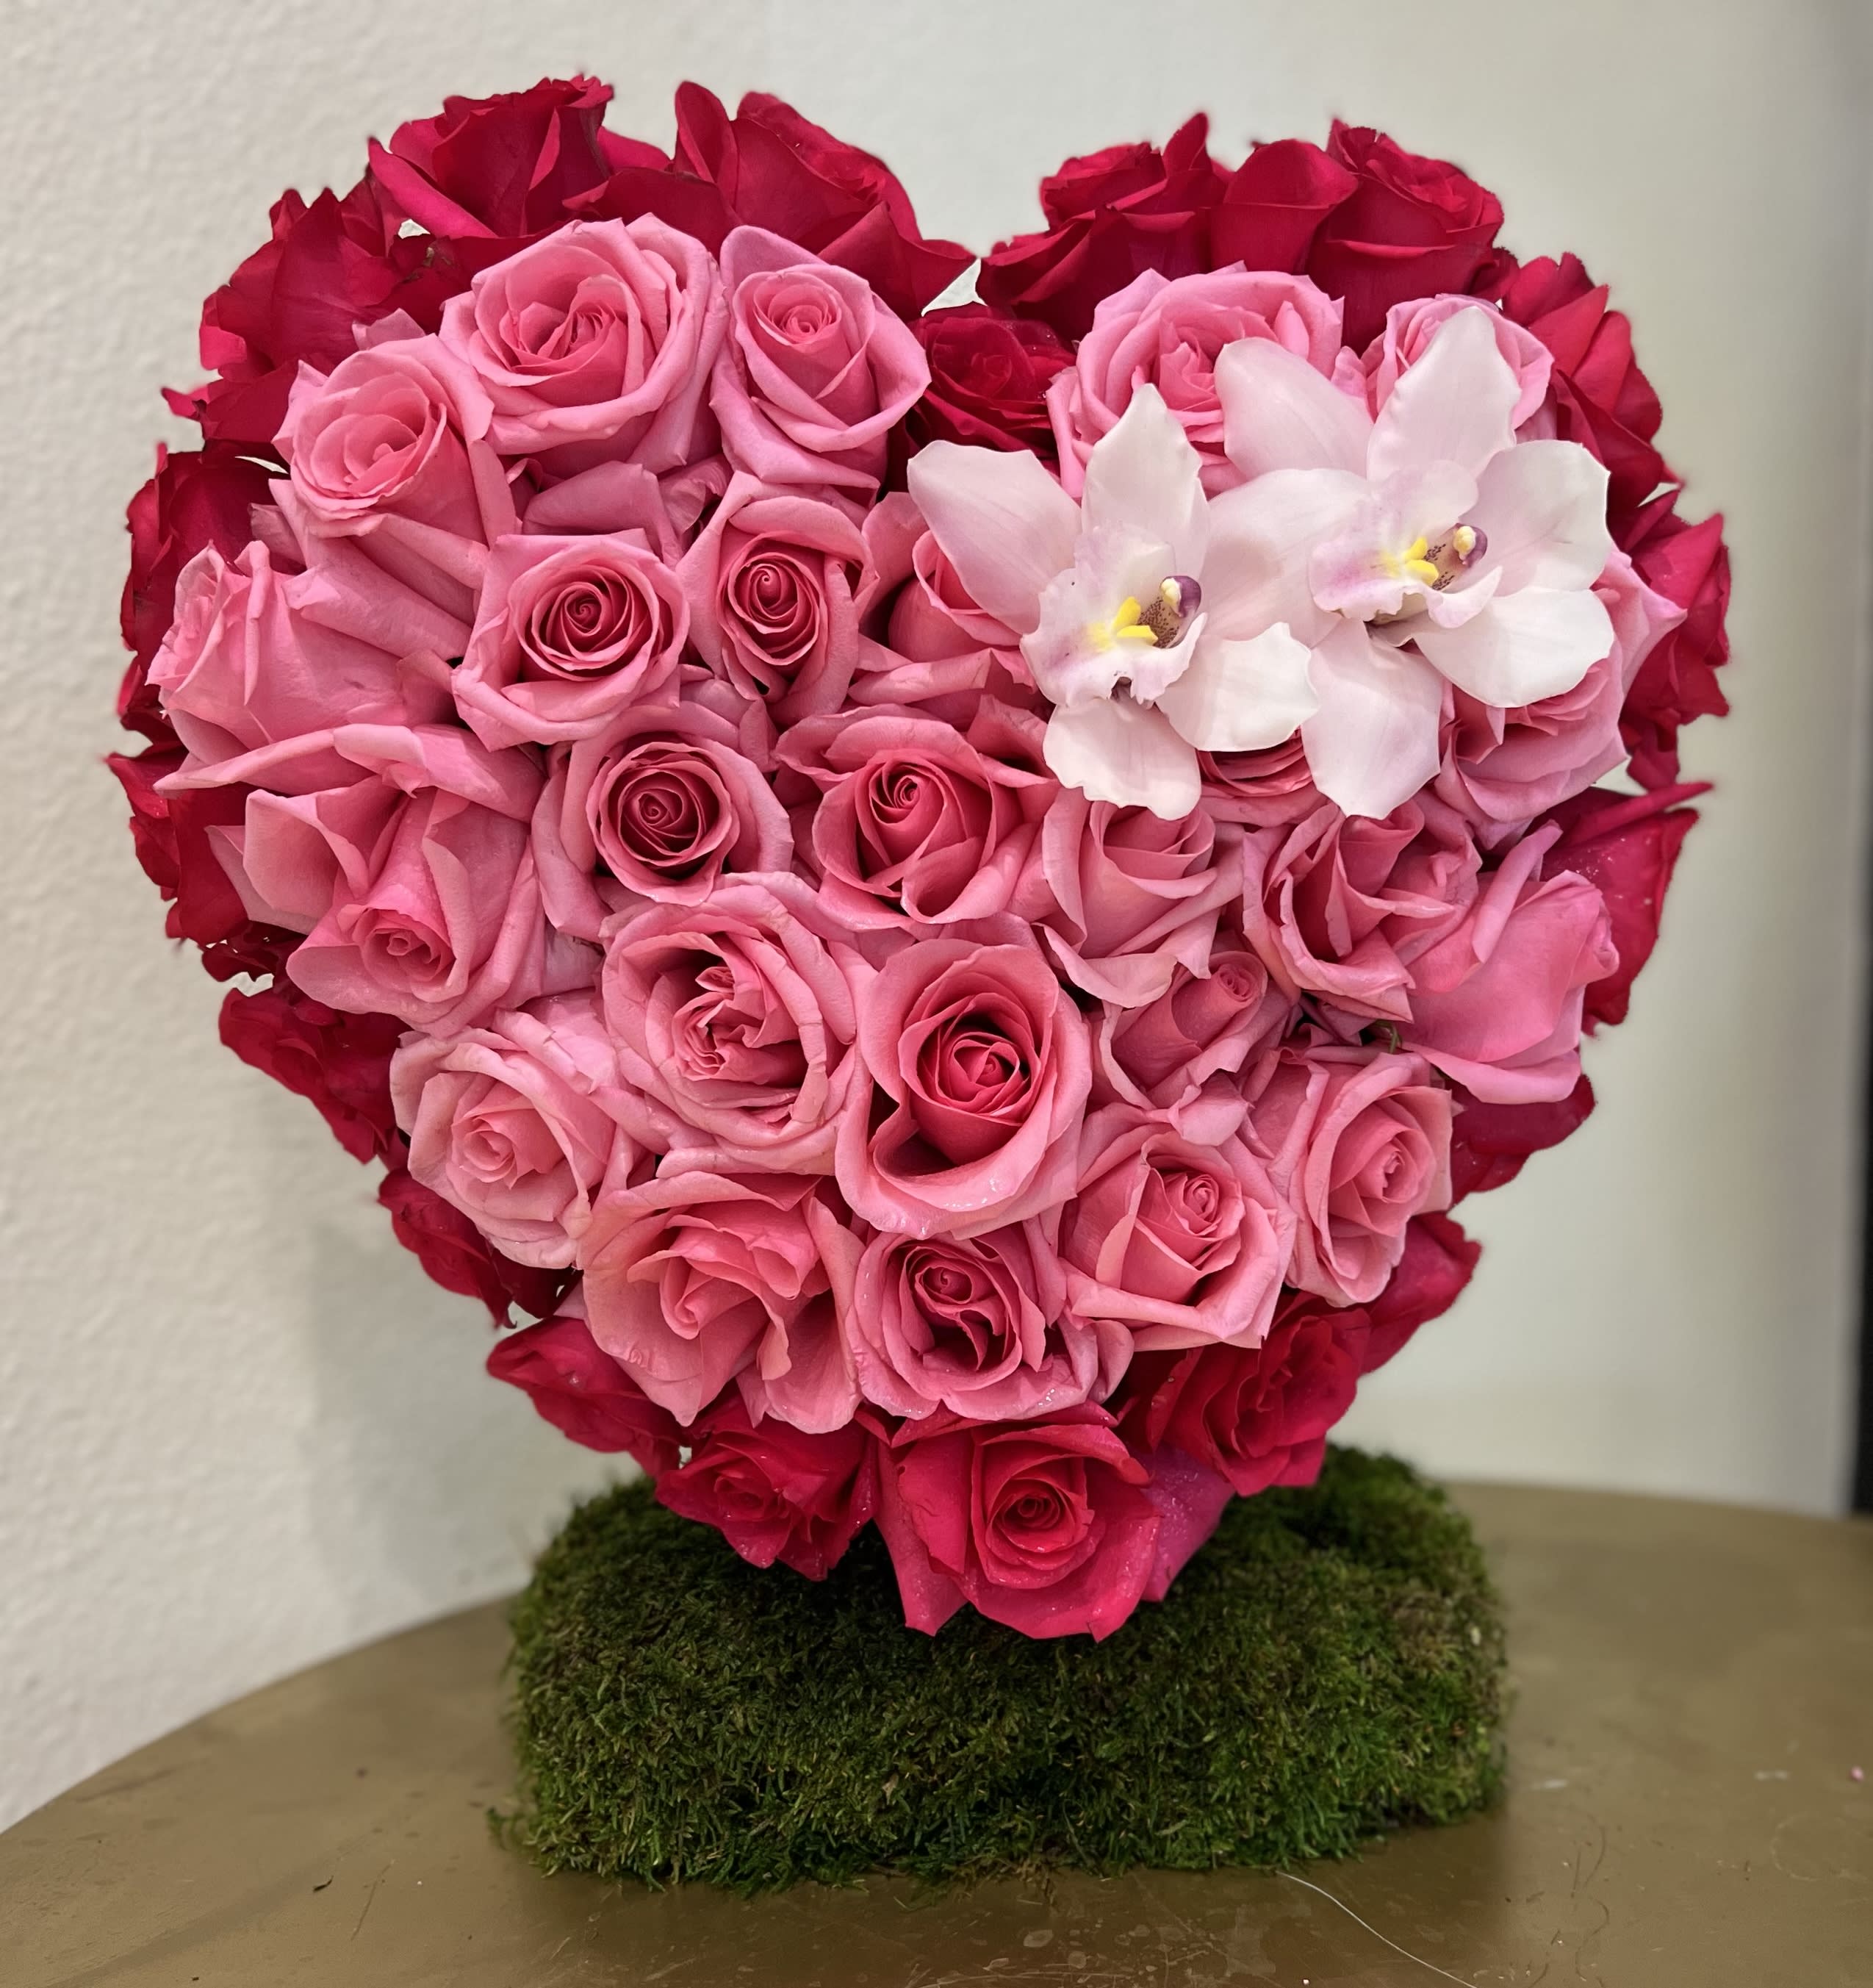 I Love You - dozens of beautiful Roses to form a heart  (other rose colors available)